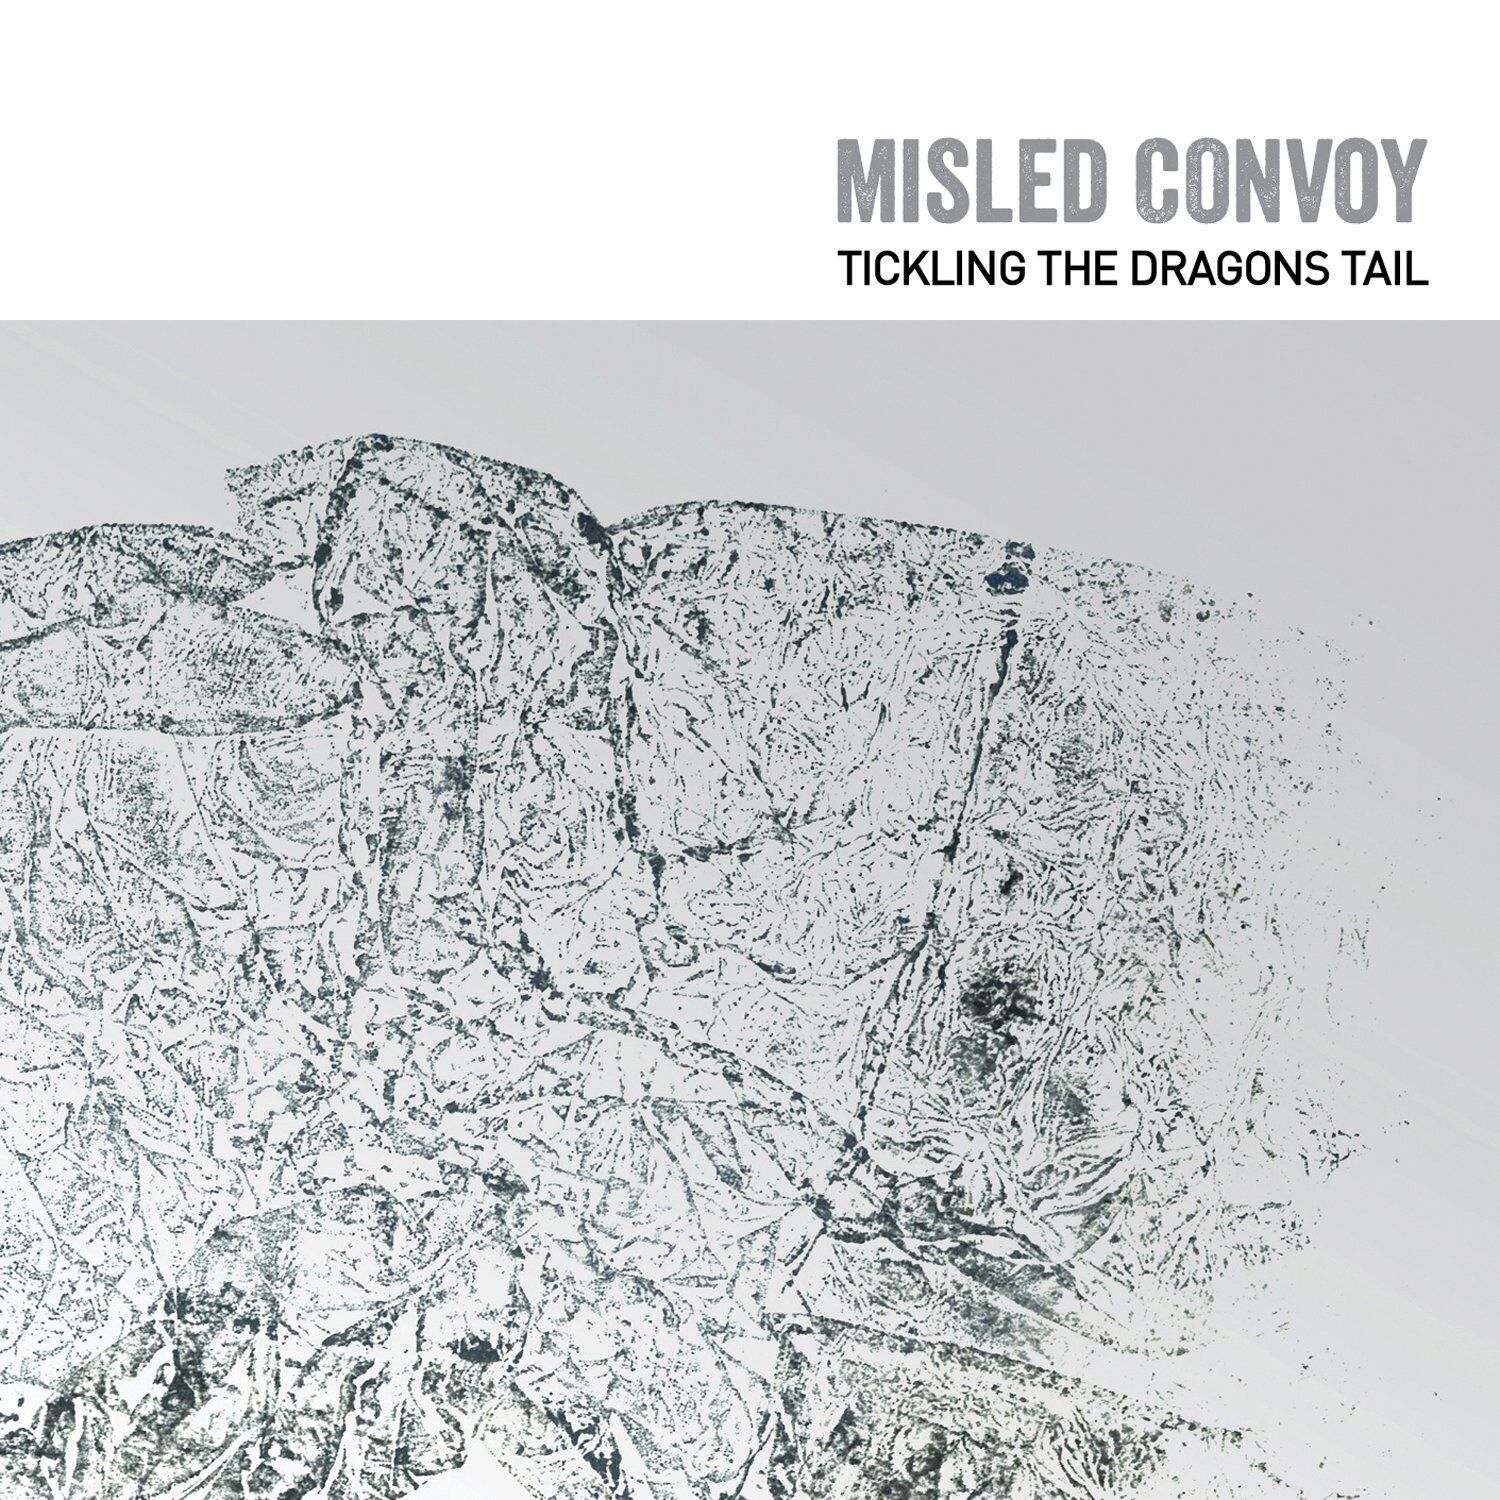 Misled Convoy Tickling the Dragons Tail (CD)